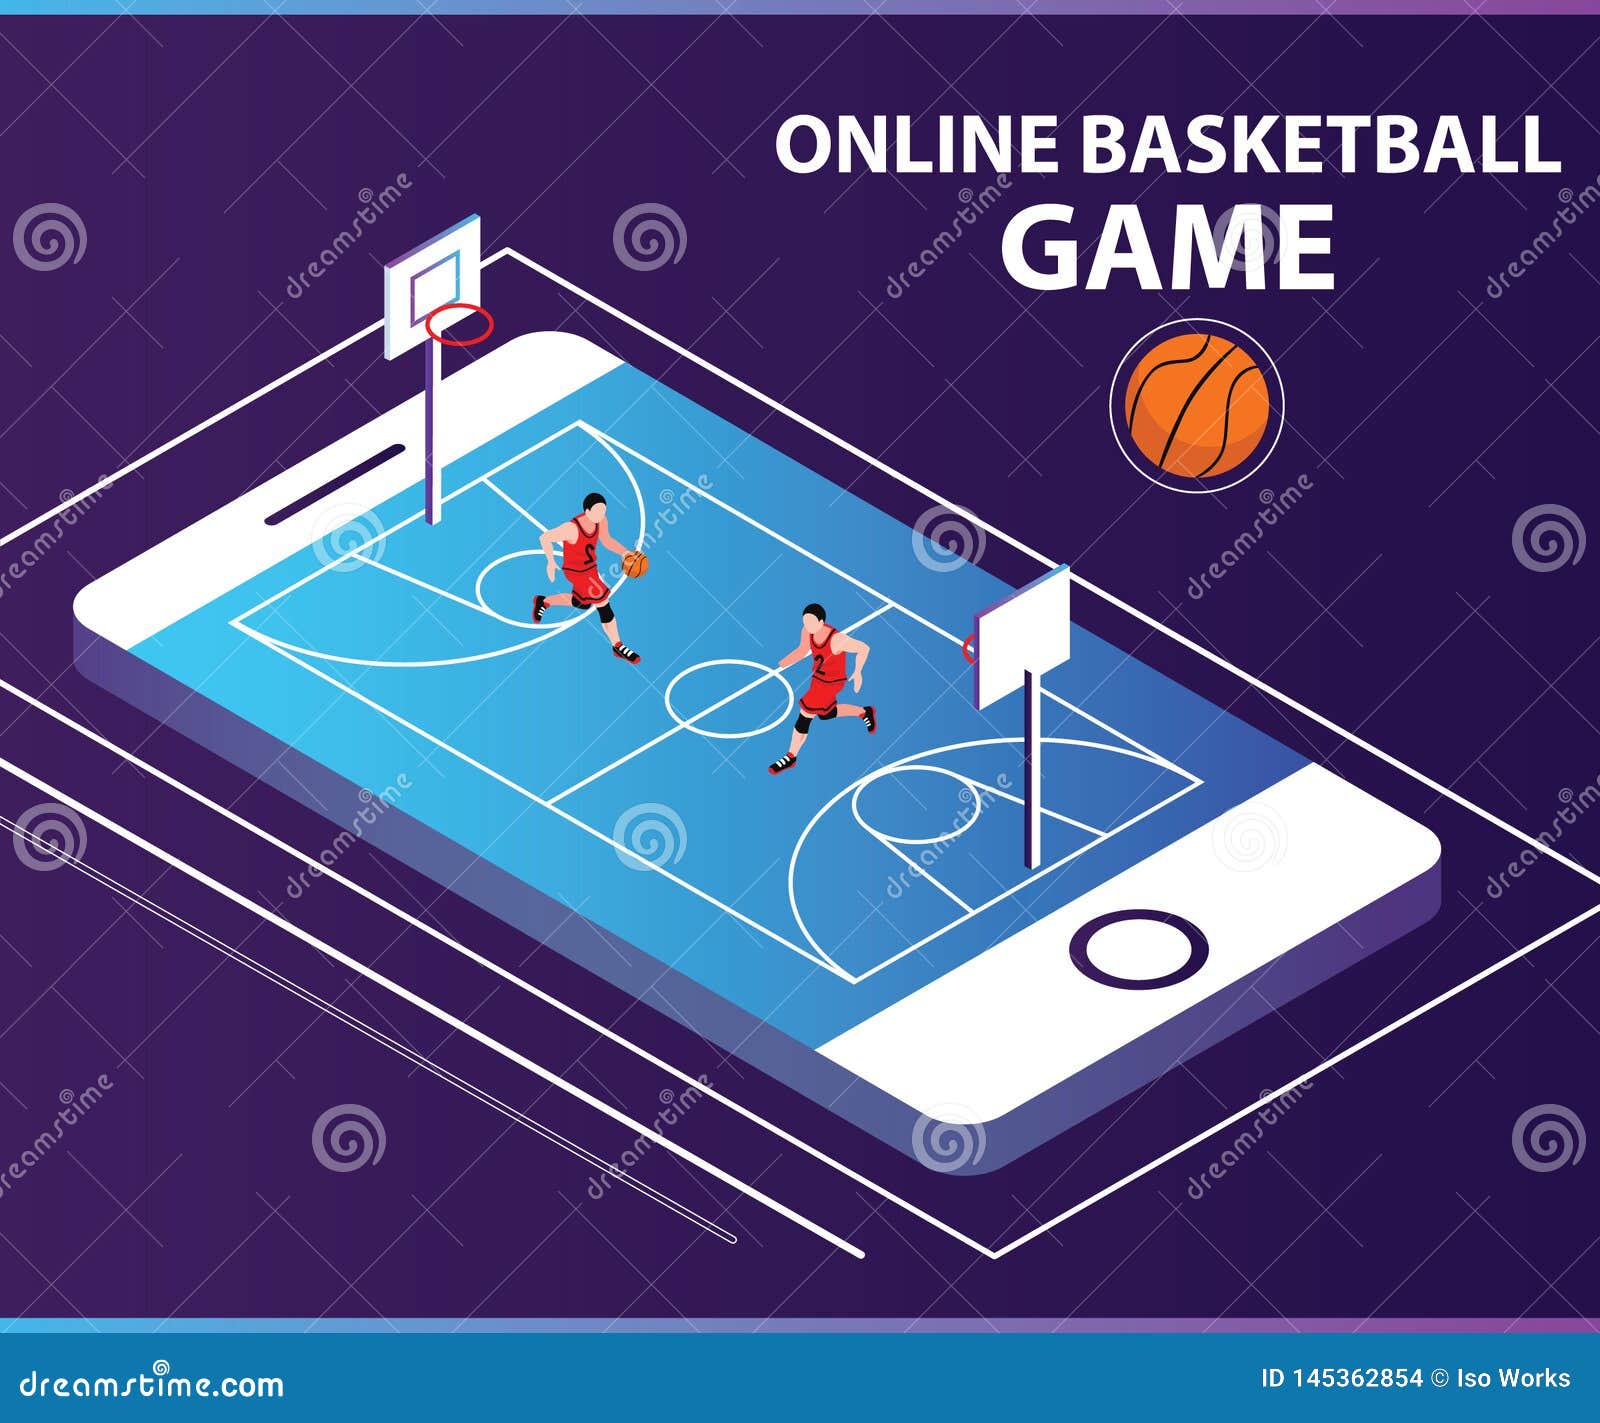 Online Basket Ball Game Where People are Playing Basket Ball Game Online Stock Illustration